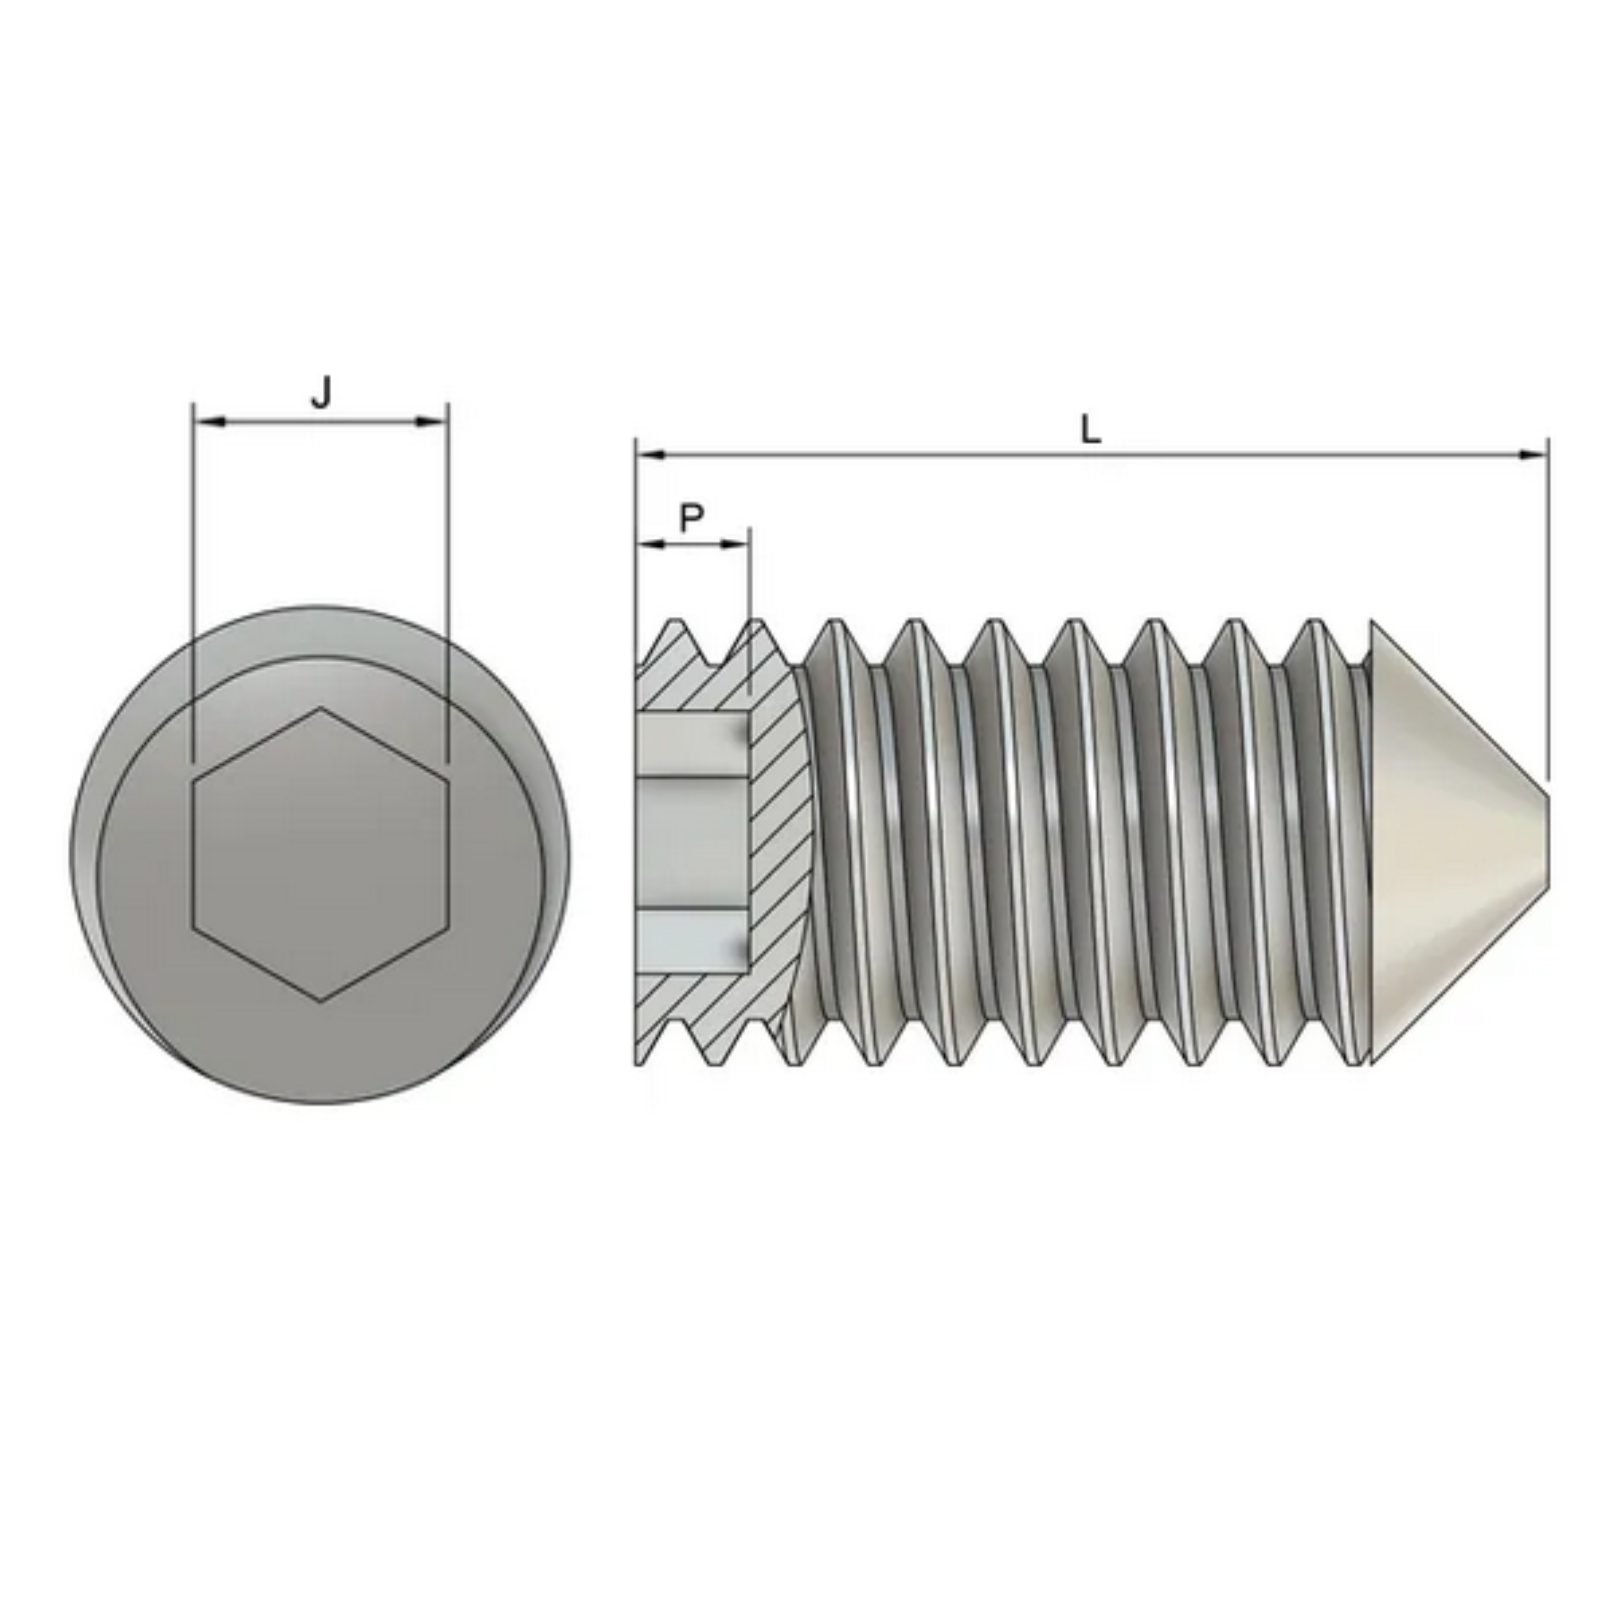 M3 Cone Point Set / Grub Screws (DIN 914) - Stainless Steel (A2)